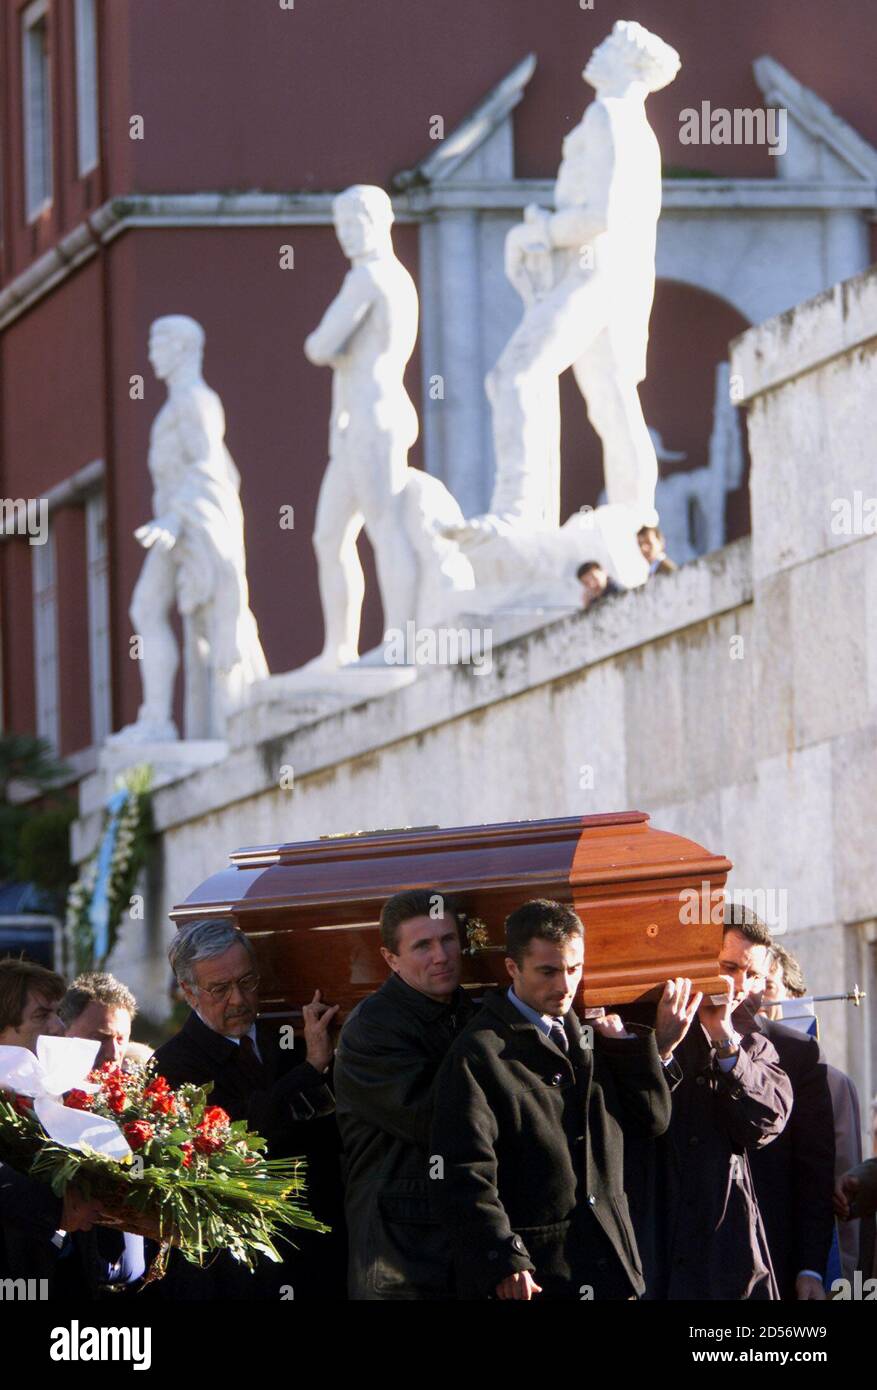 The coffin containing the body of IAAF President Primo Nebiolo is carried by Italian athlete Francesco Mori (2nd R) and Ukrainian pole vaulter Sergei Bubka (C) during a memorial service in Rome November 9. Nebiolo, who transformed athletics into a multi-billion dollar business during almost two deacdes as International Amateur Athletic Federation (IAAF) president, died of heart failure on November 7.  PC/TB Stock Photo